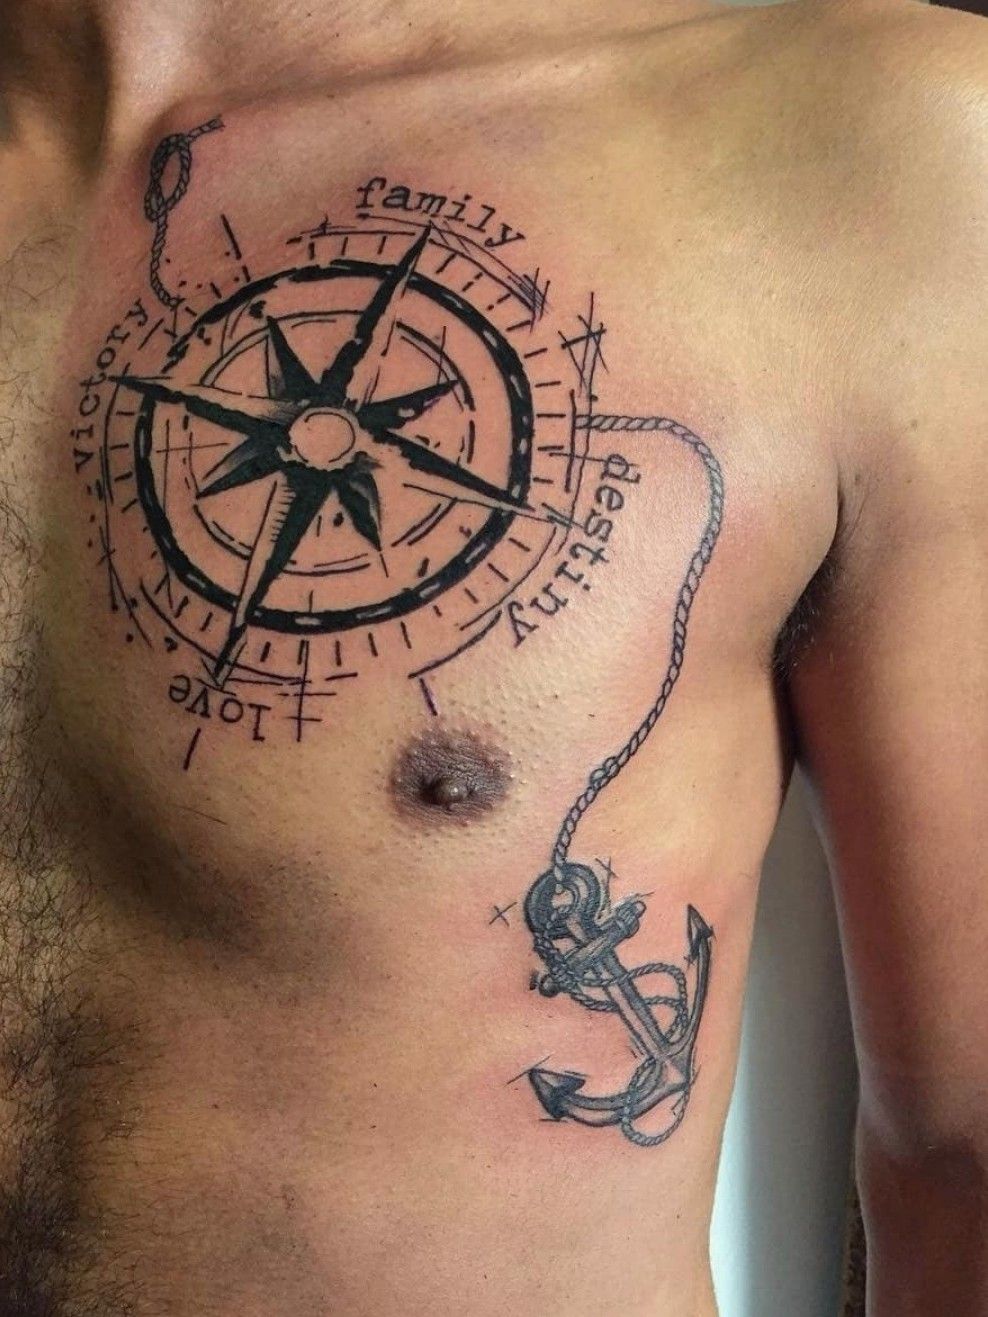 RJ Tattoos  Yesterday work Travelling theme Half Sleeve 3D compass   with anchor  For Appointments DM rjtattoos forearmtattoo  anchortattoo anchor compassion compass compasstattoo 3dtattoo  halfsleevetattoo halfsleeve 